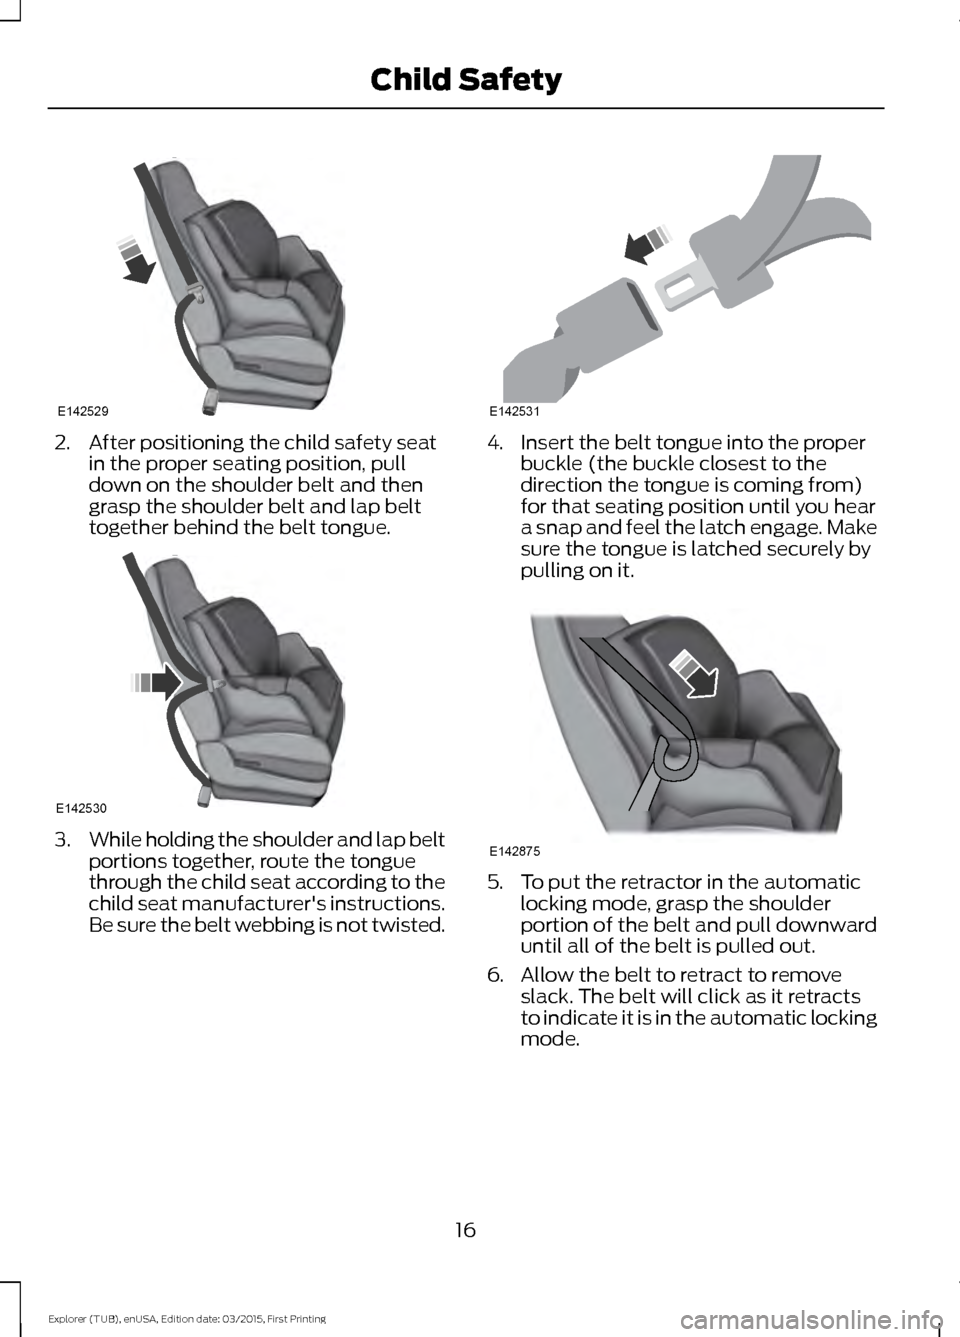 FORD POLICE INTERCEPTOR UTILITY 2016 1.G User Guide 2. After positioning the child safety seat
in the proper seating position, pull
down on the shoulder belt and then
grasp the shoulder belt and lap belt
together behind the belt tongue. 3.
While holdin